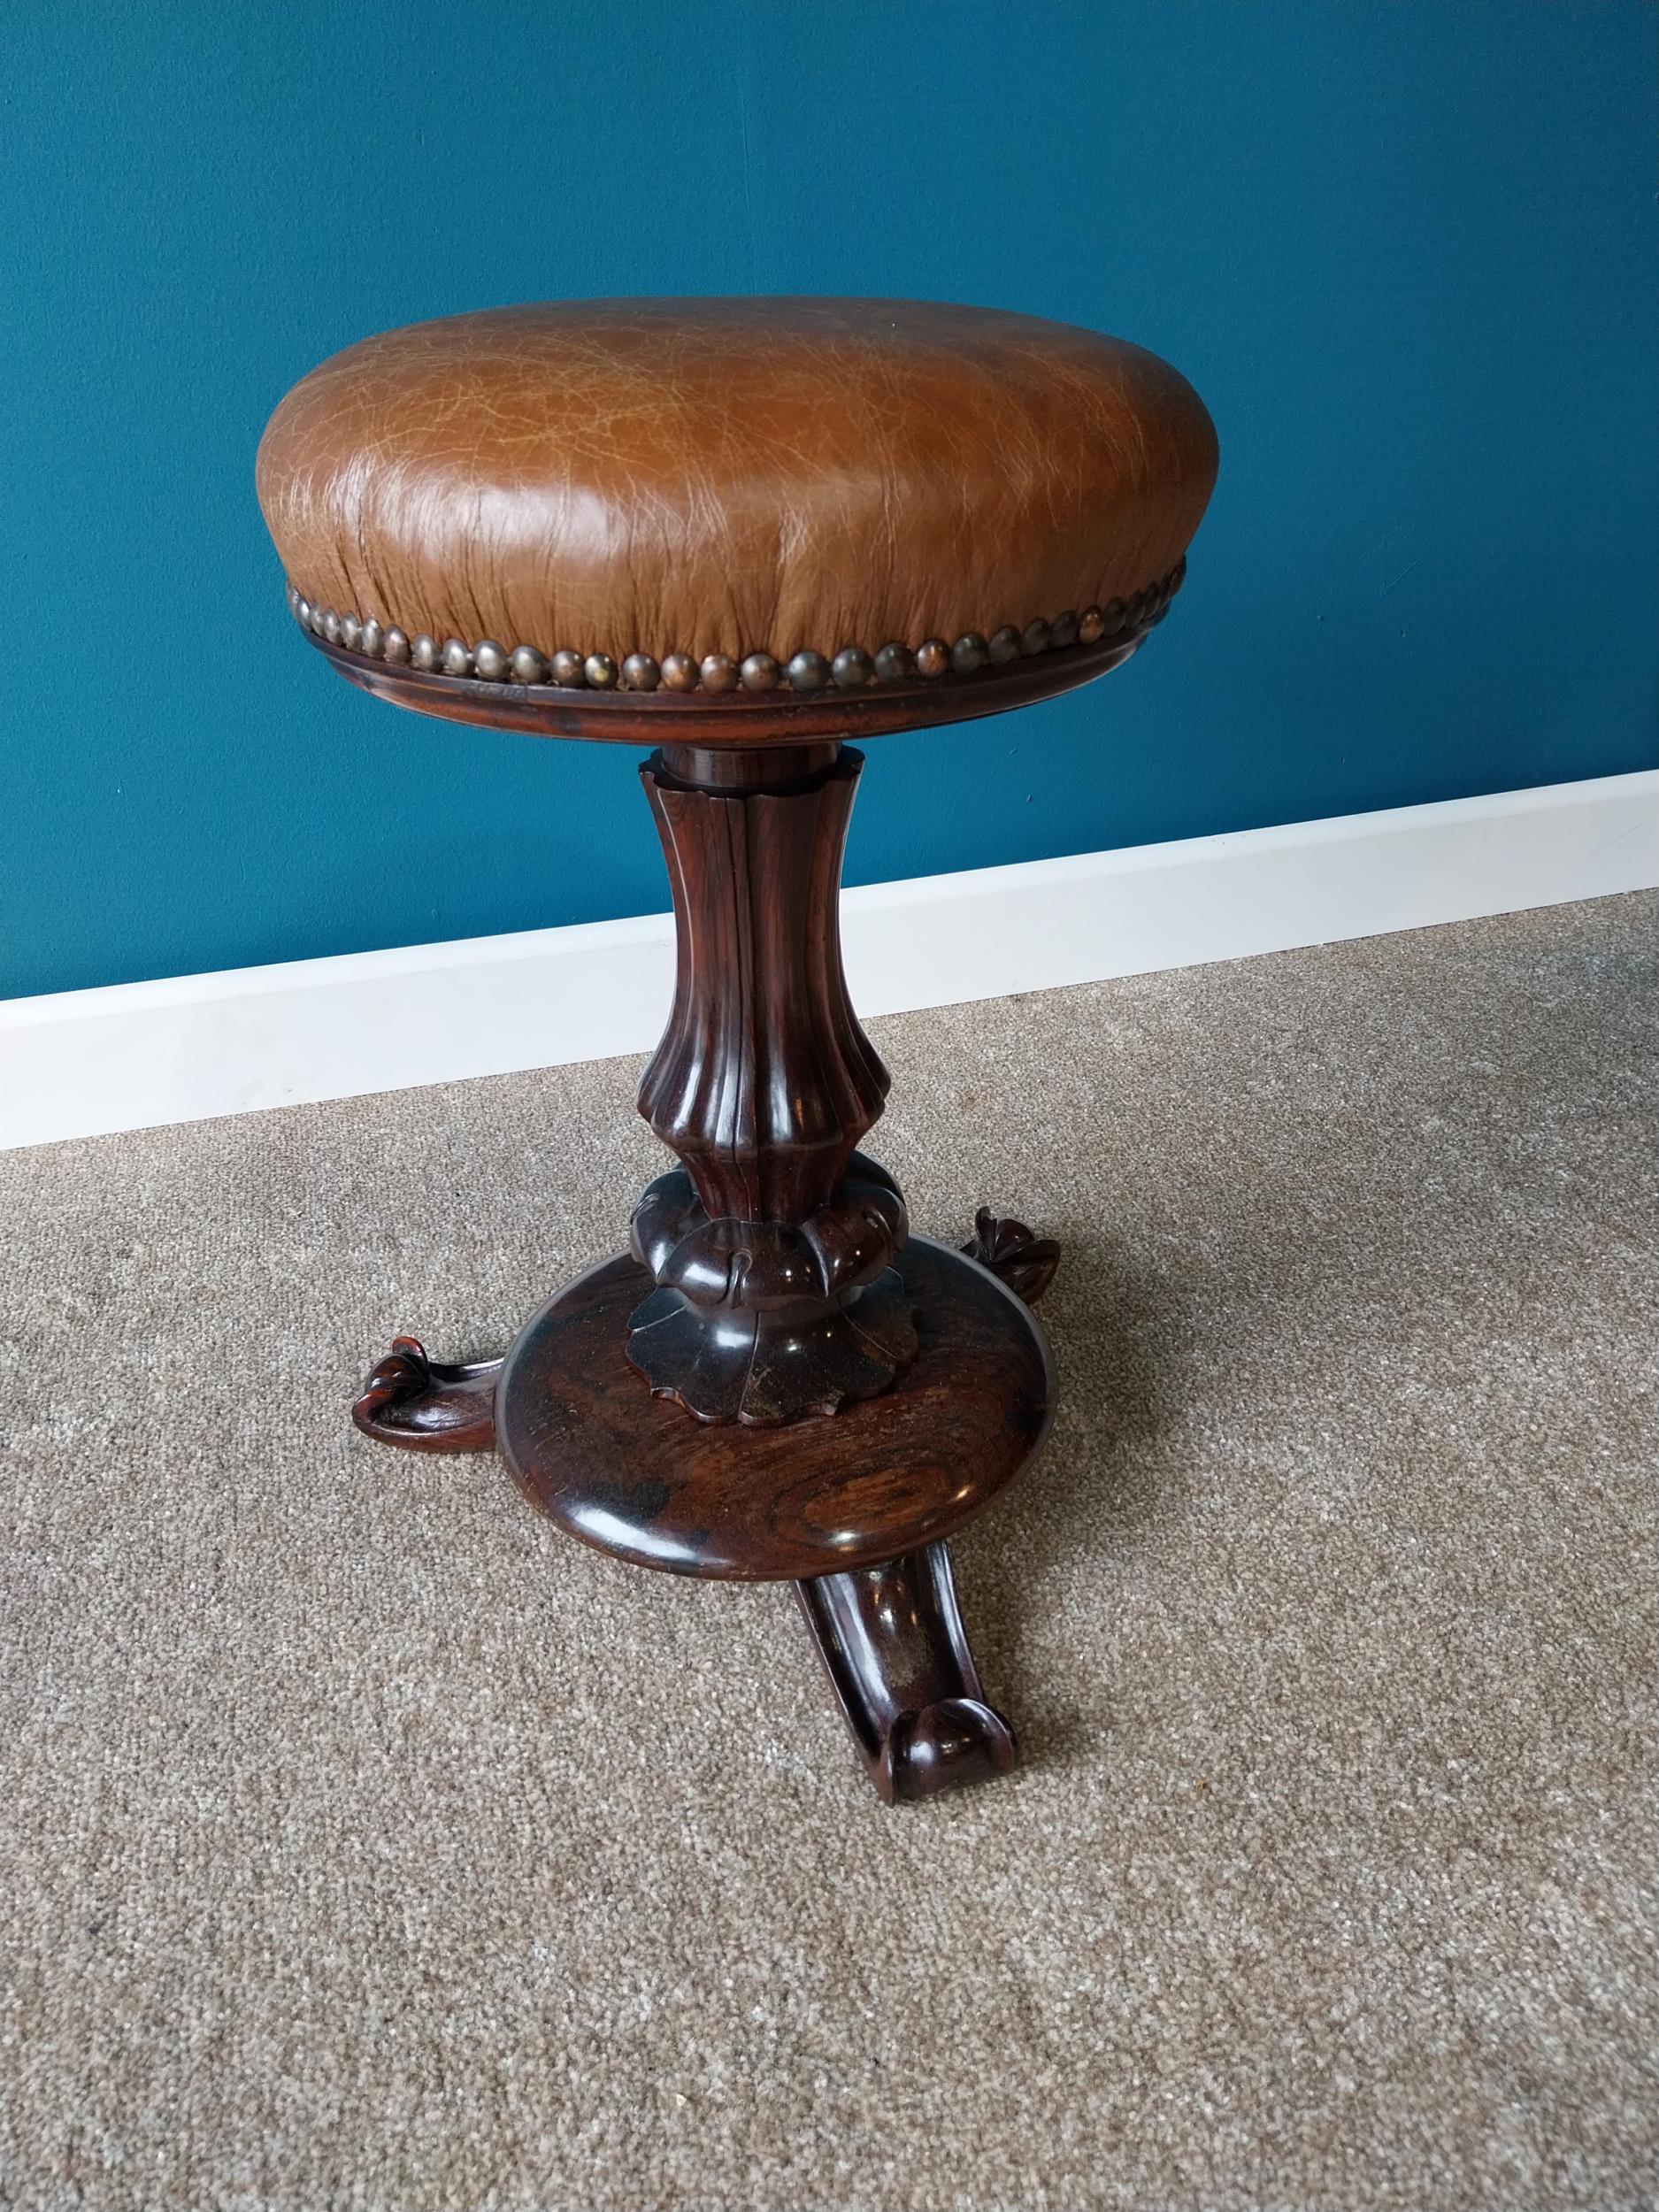 William IV rosewood revolving piano stool with leather upholstered seat {47 cm H x 34 cm Dia.}.